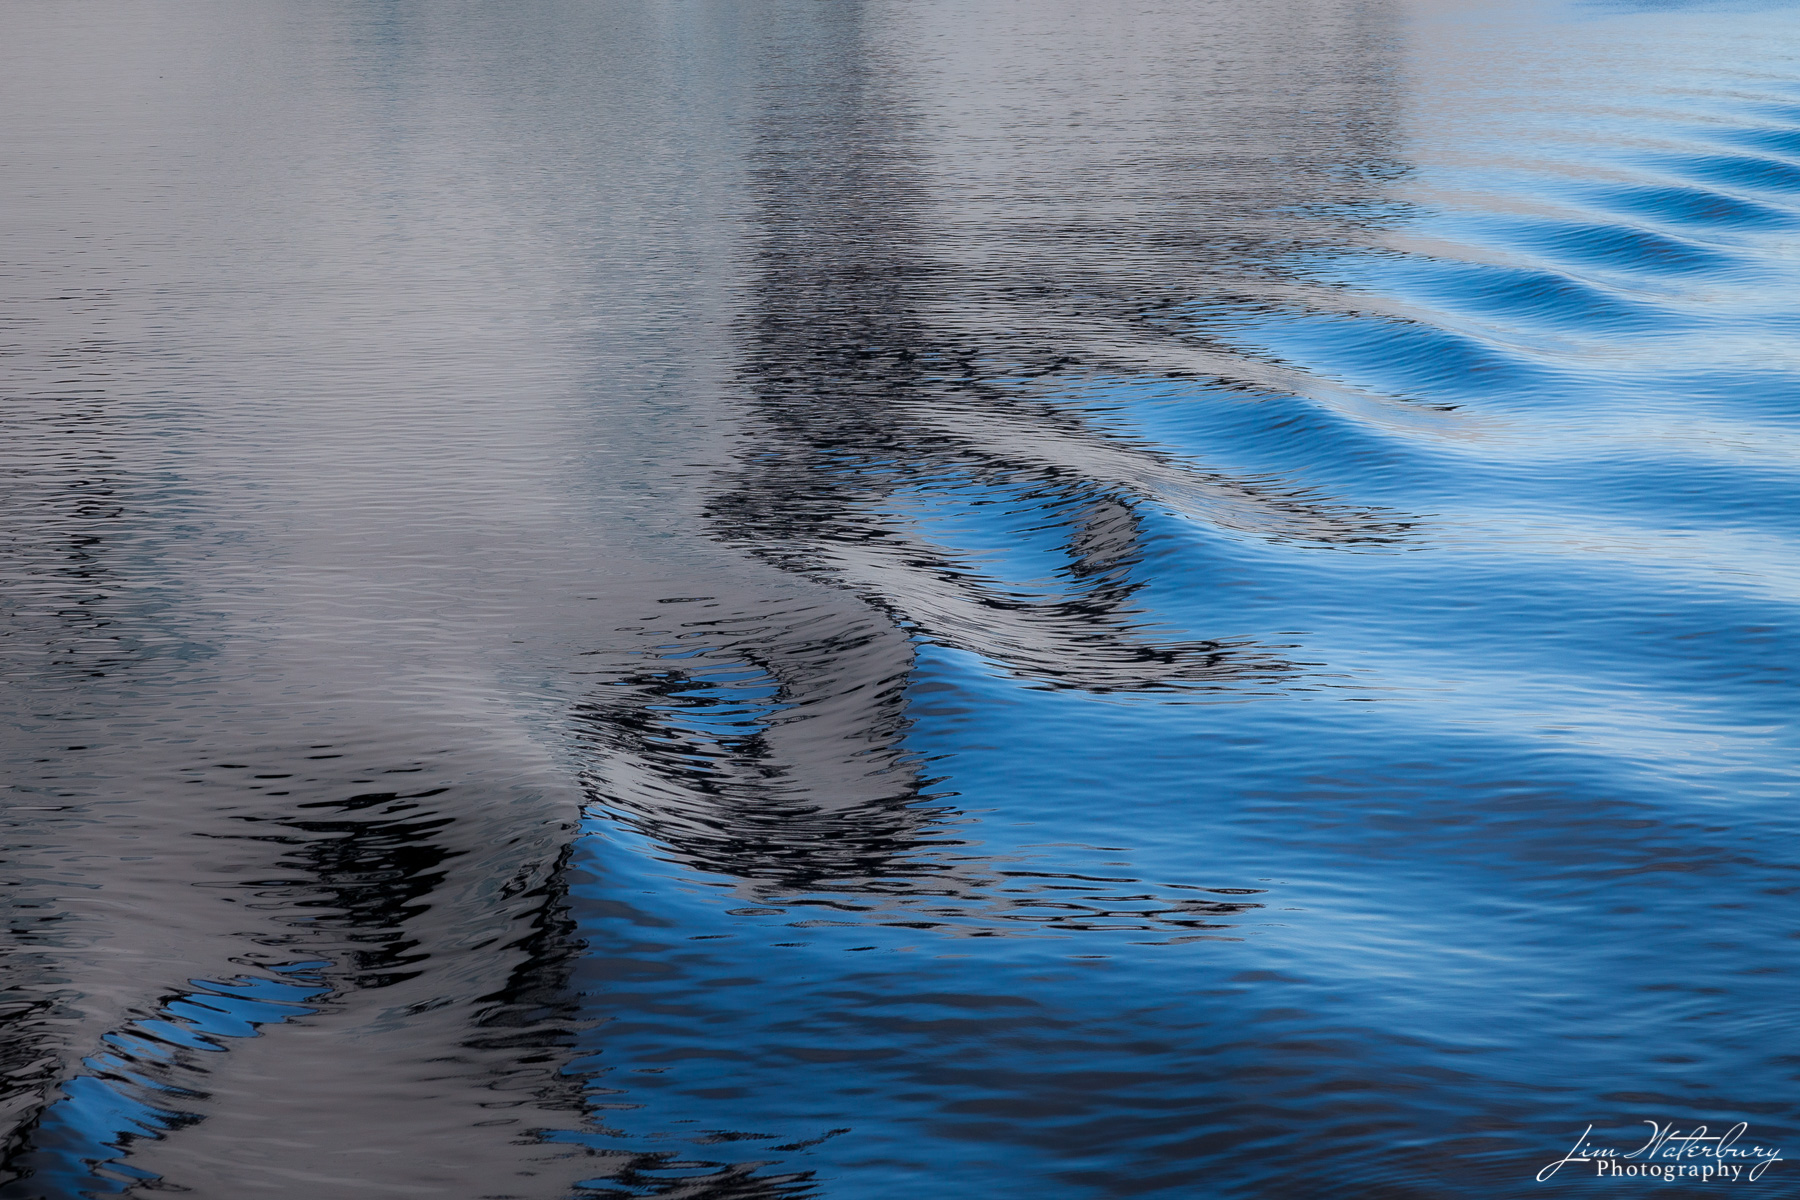 Ripples and reflections in water off the Antarctic Penninsula.